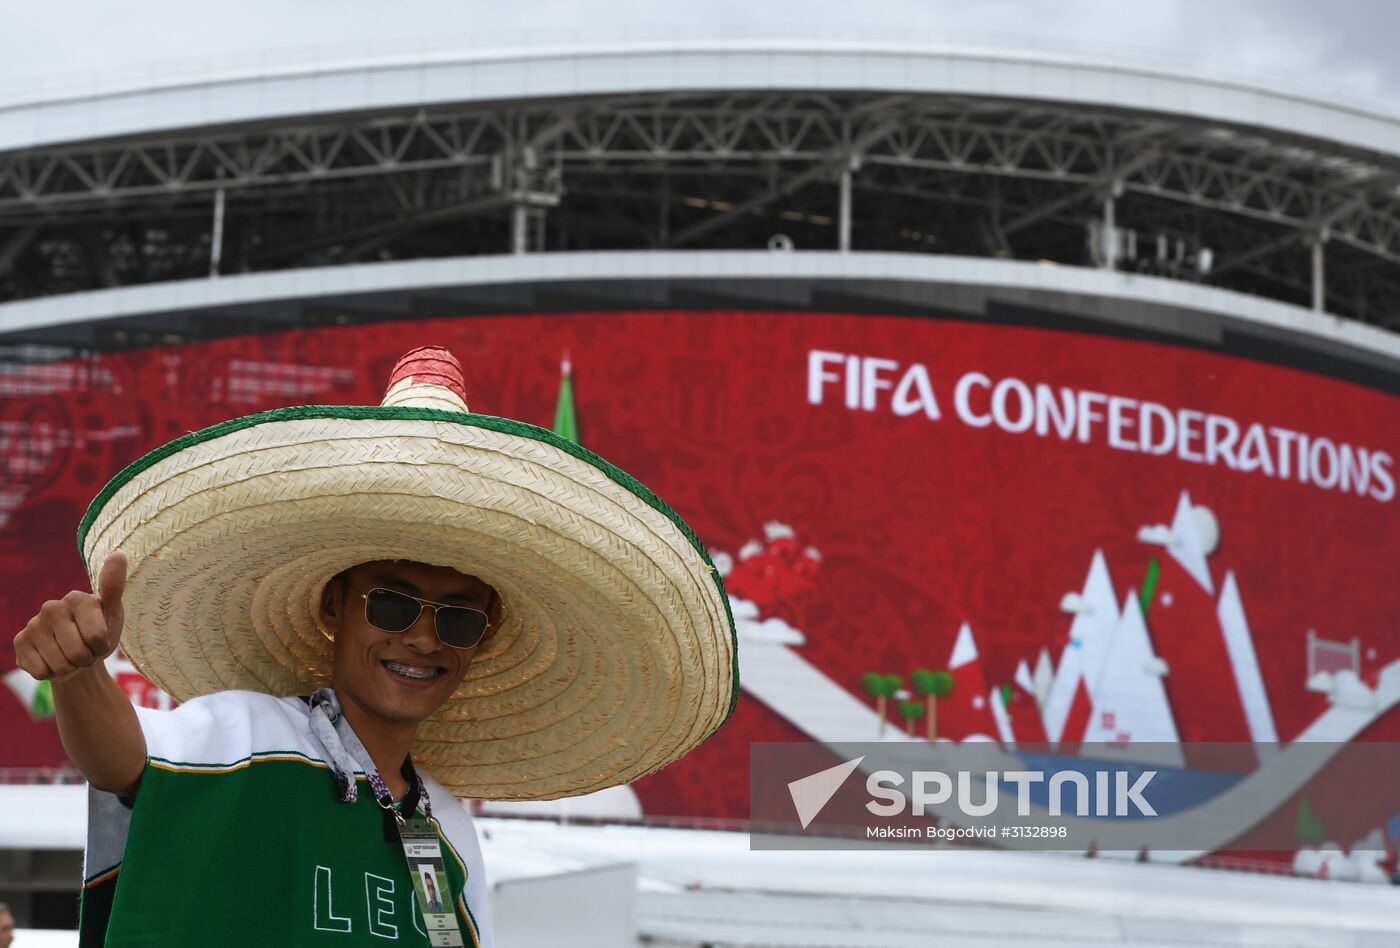 Kazan Arena before 2017 FIFA Confederations Cup match between Portugal and Mexico